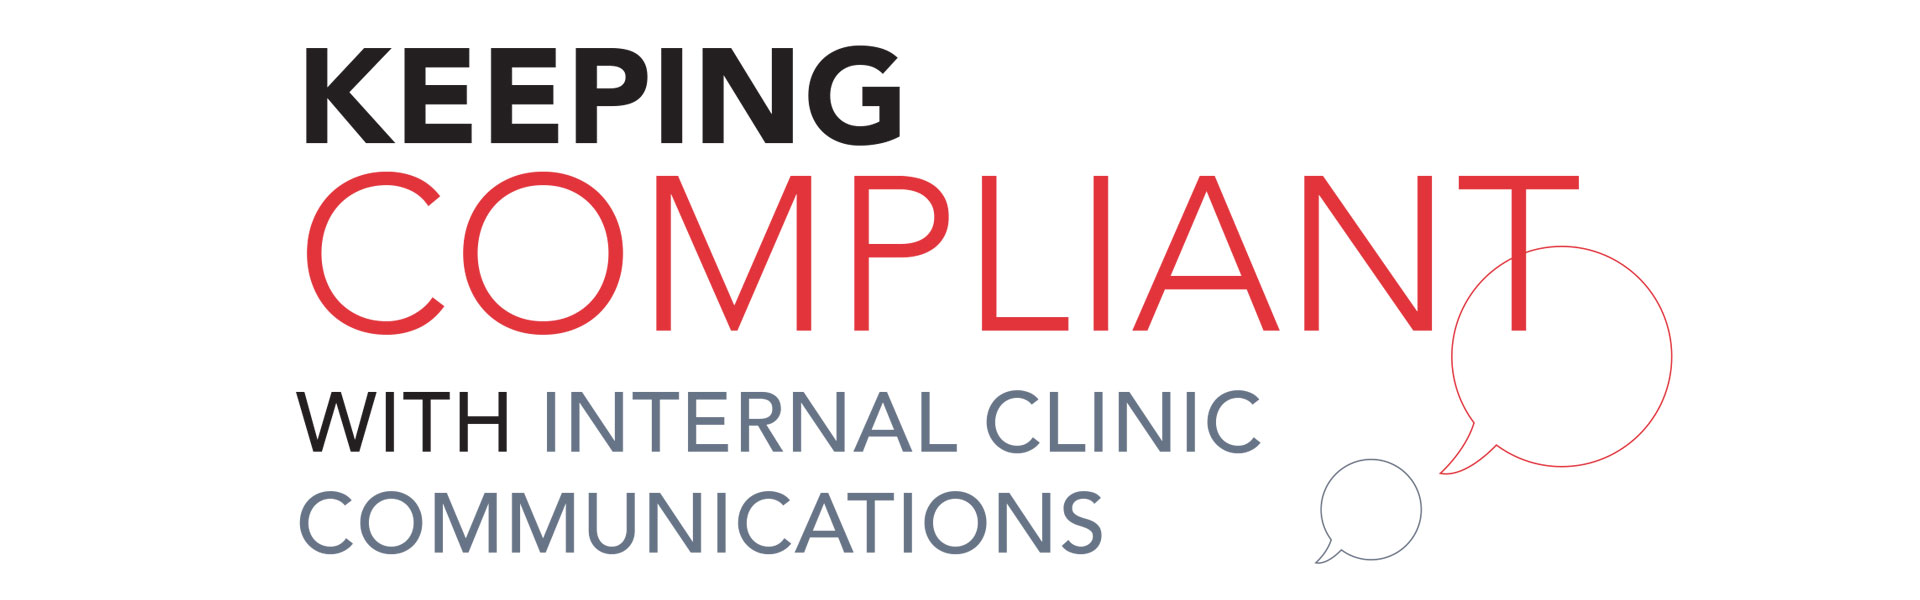 Keeping Compliant with Internal Clinic Communications